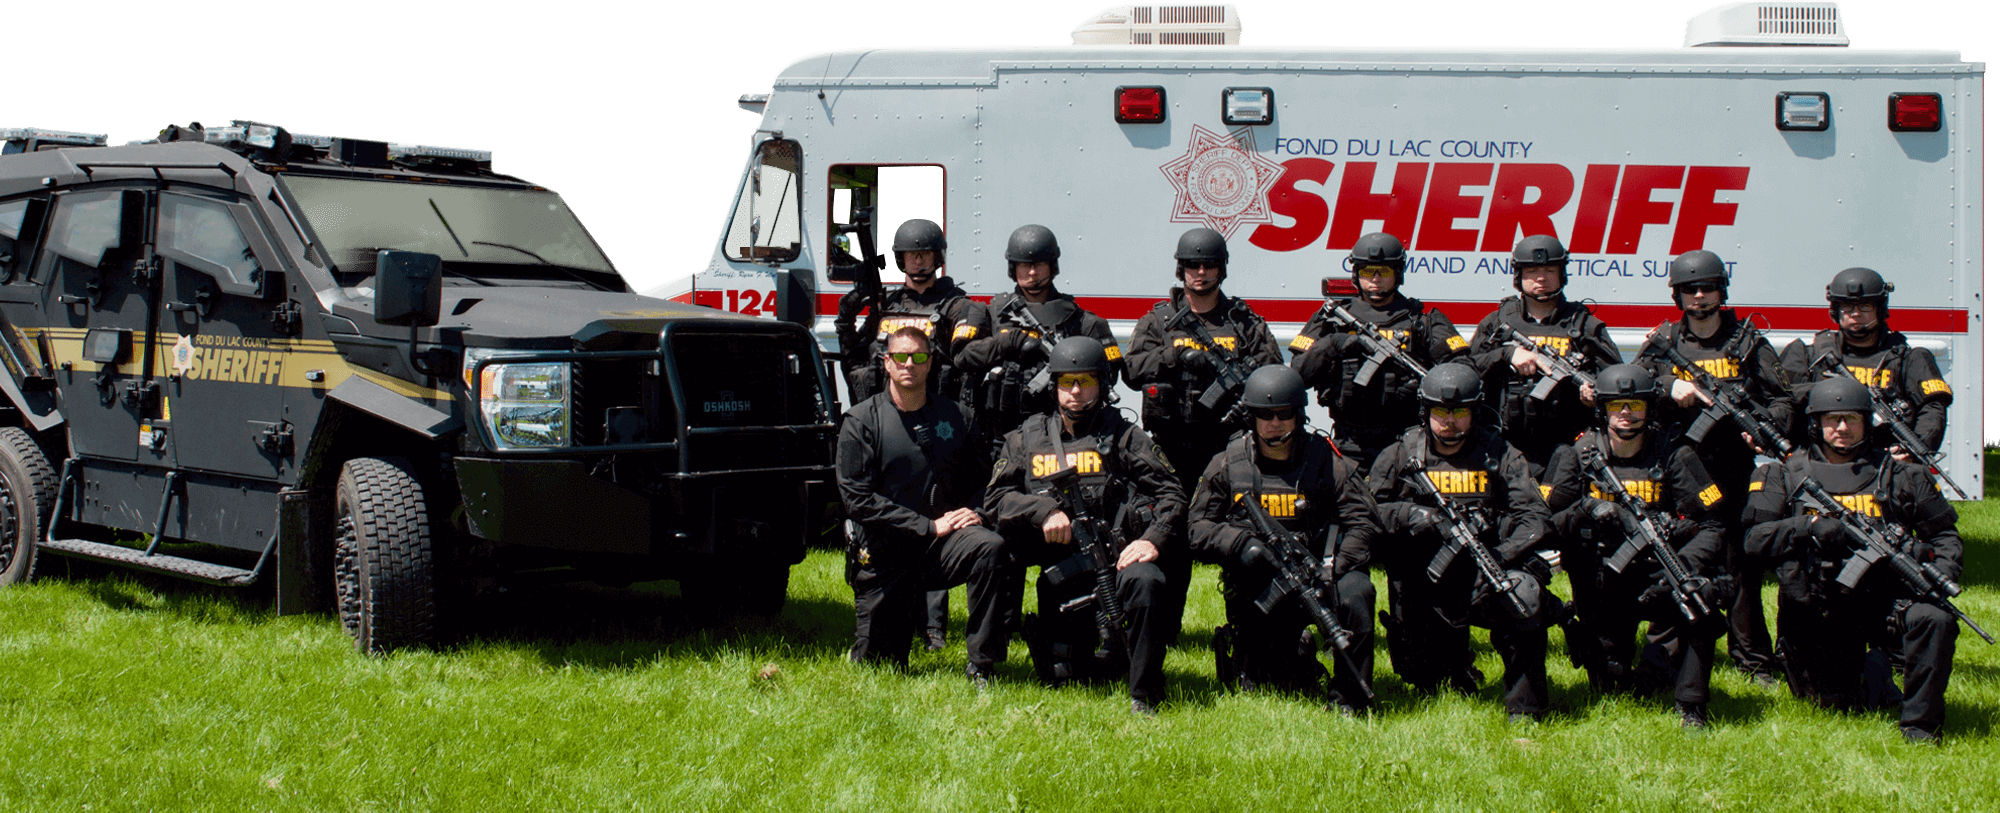 Fond Du Lac Sheriff Tactical squad with vehicles